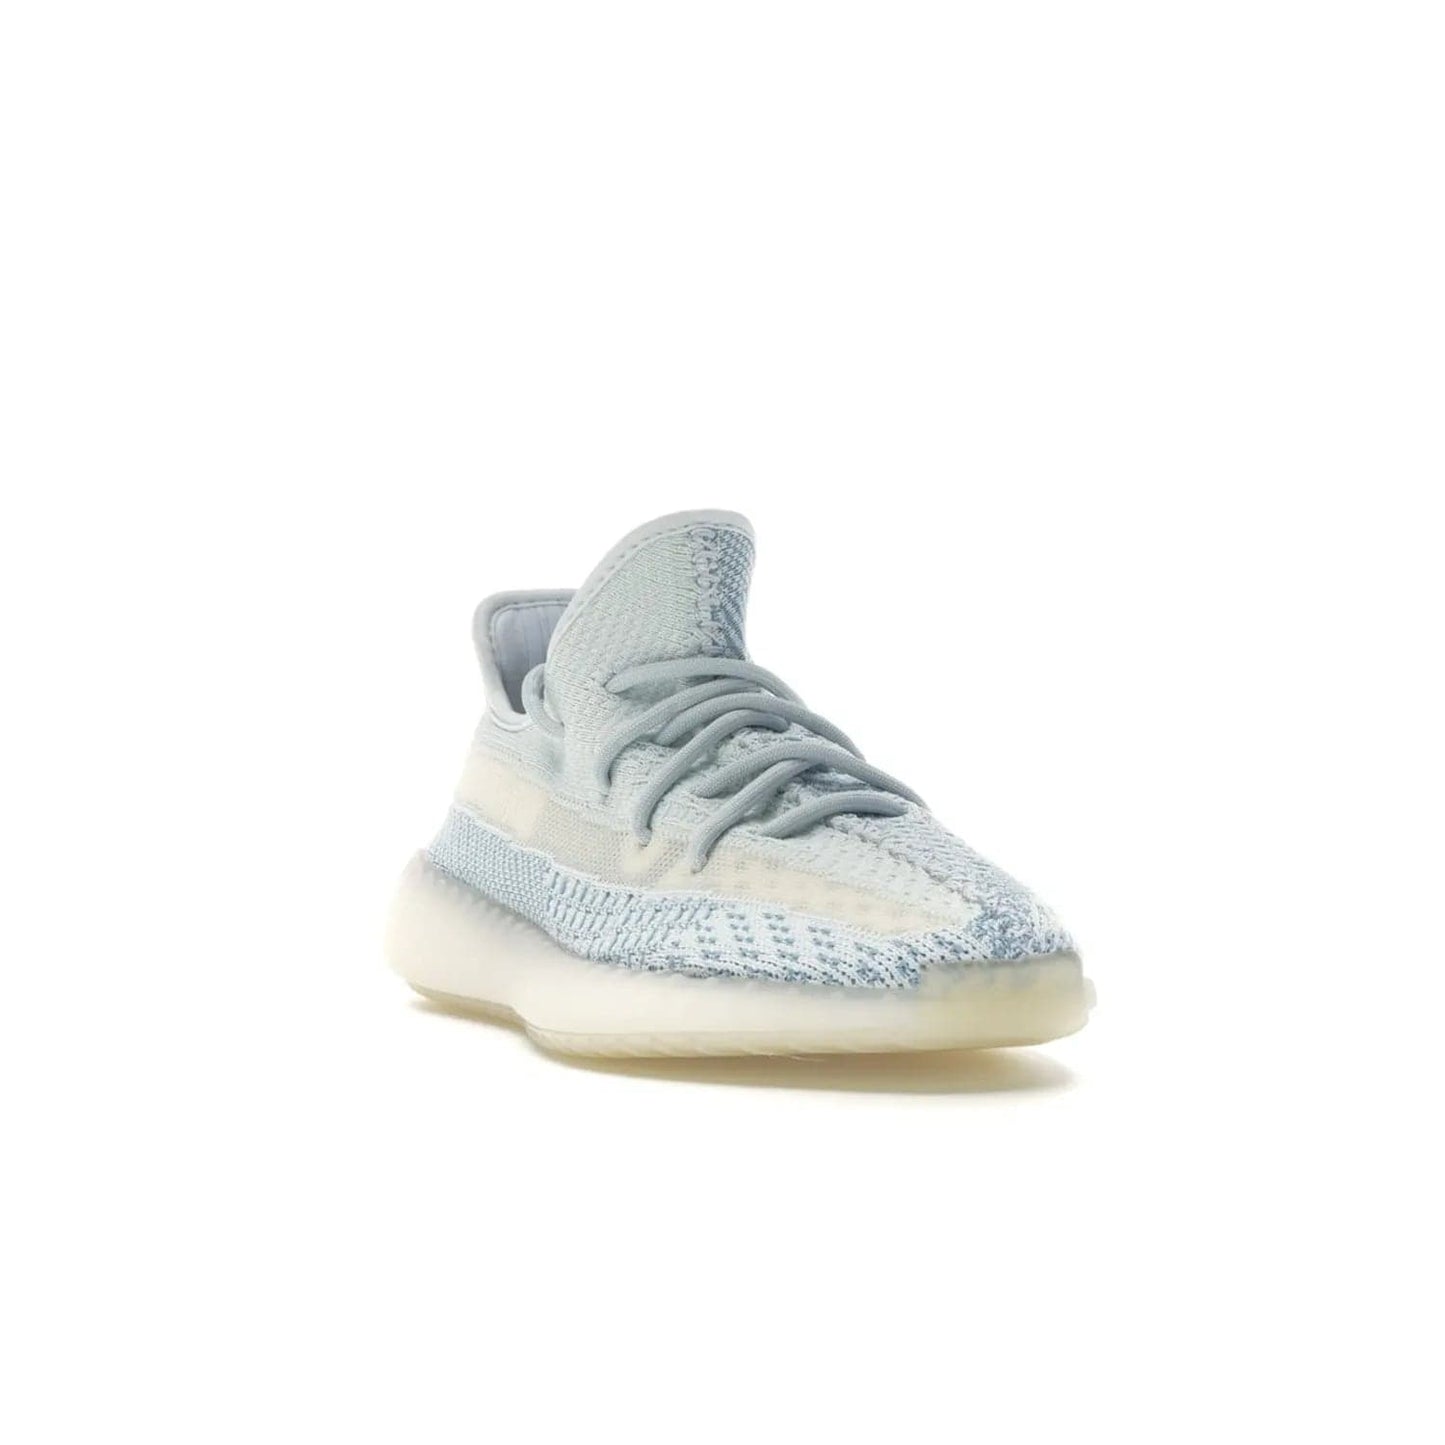 adidas Yeezy Boost 350 V2 Cloud White (Non-Reflective) - Image 7 - Only at www.BallersClubKickz.com - Uniquely designed adidas Yeezy Boost 350 V2 Cloud White (Non-Reflective) with a Primeknit upper in shades of cream and blue with a contrasting hard sole. A fashion-forward sneaker with a transparent strip and blue-and-white patterns.